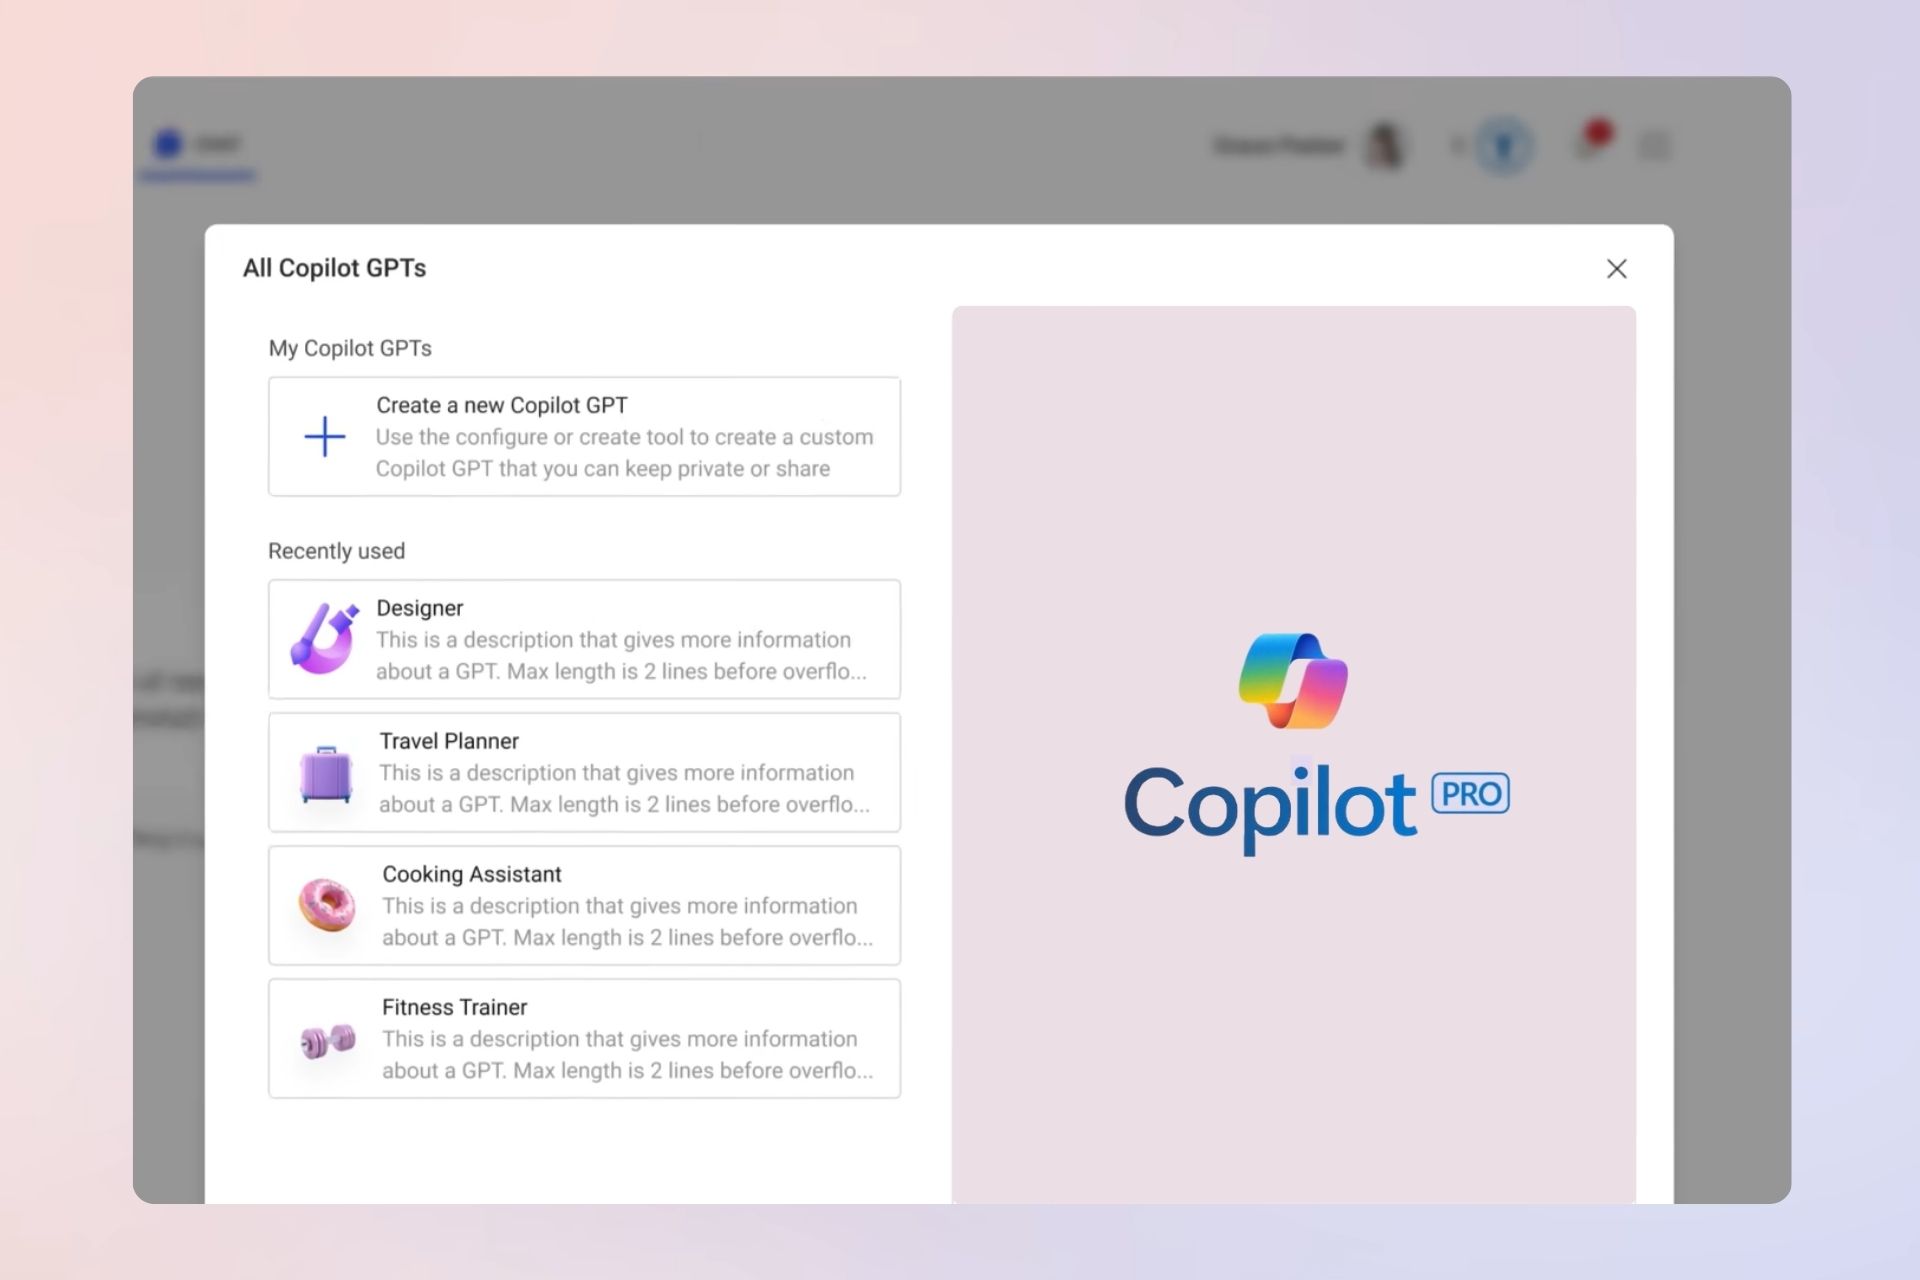 Microsoft is rolling out GPT Builder's access for more Copilot Pro users